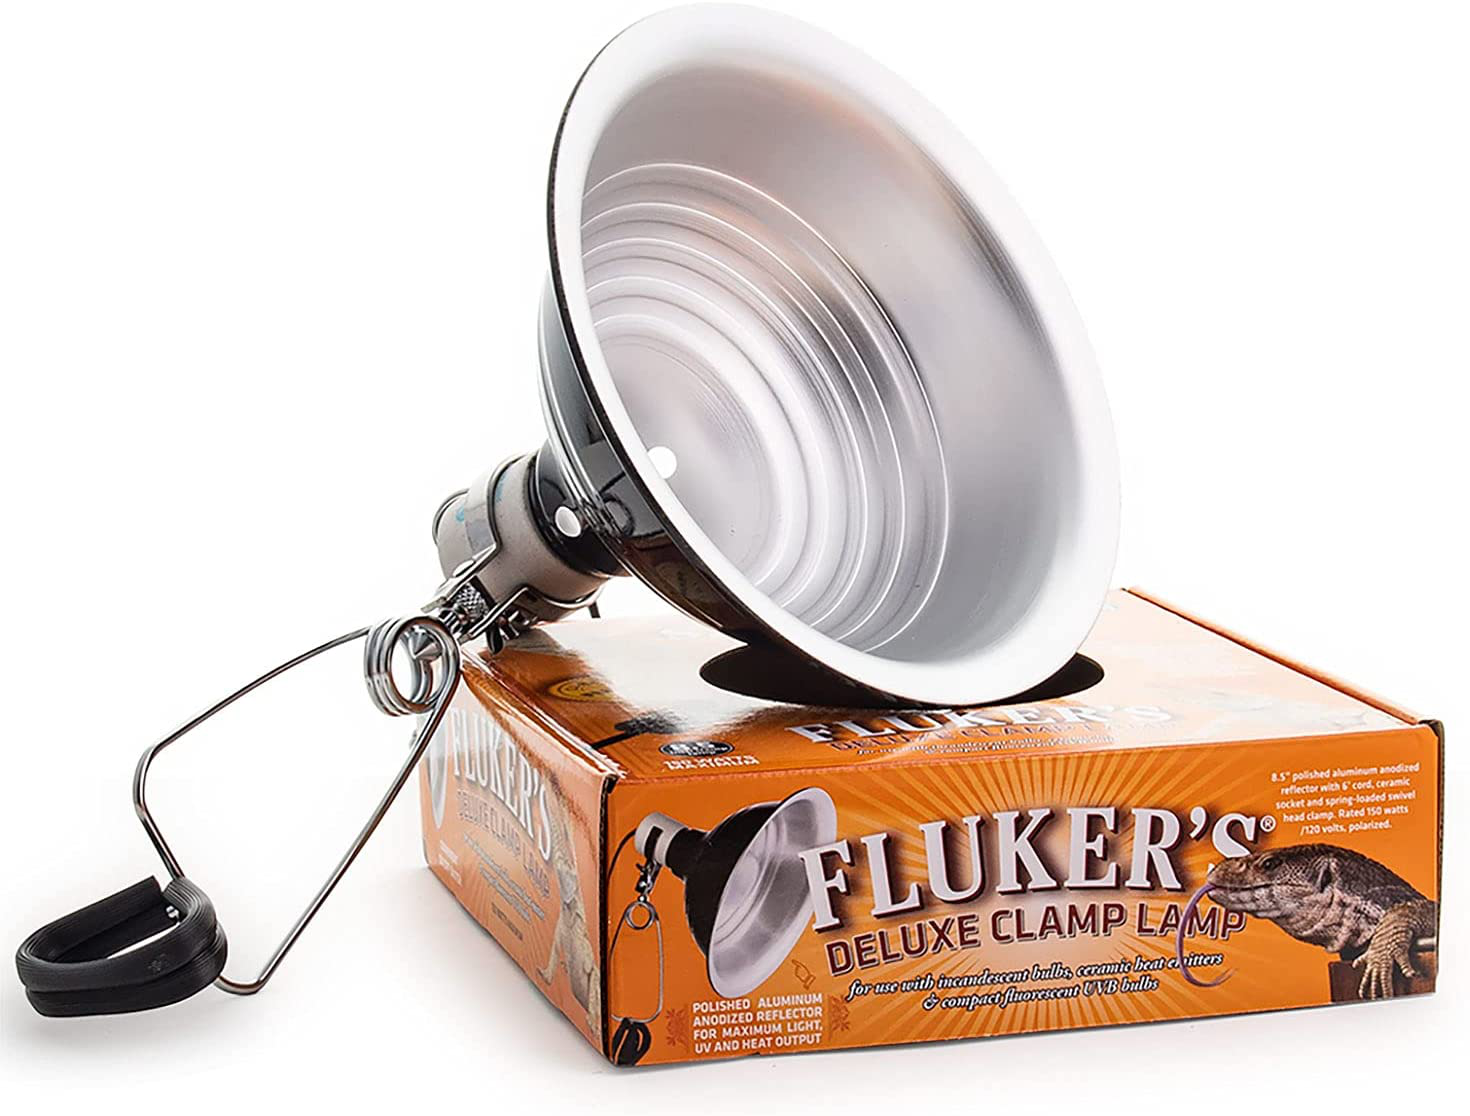 Fluker'S Repta-Clamp Lamp with Switch for Reptiles ( Packaging May Vary )